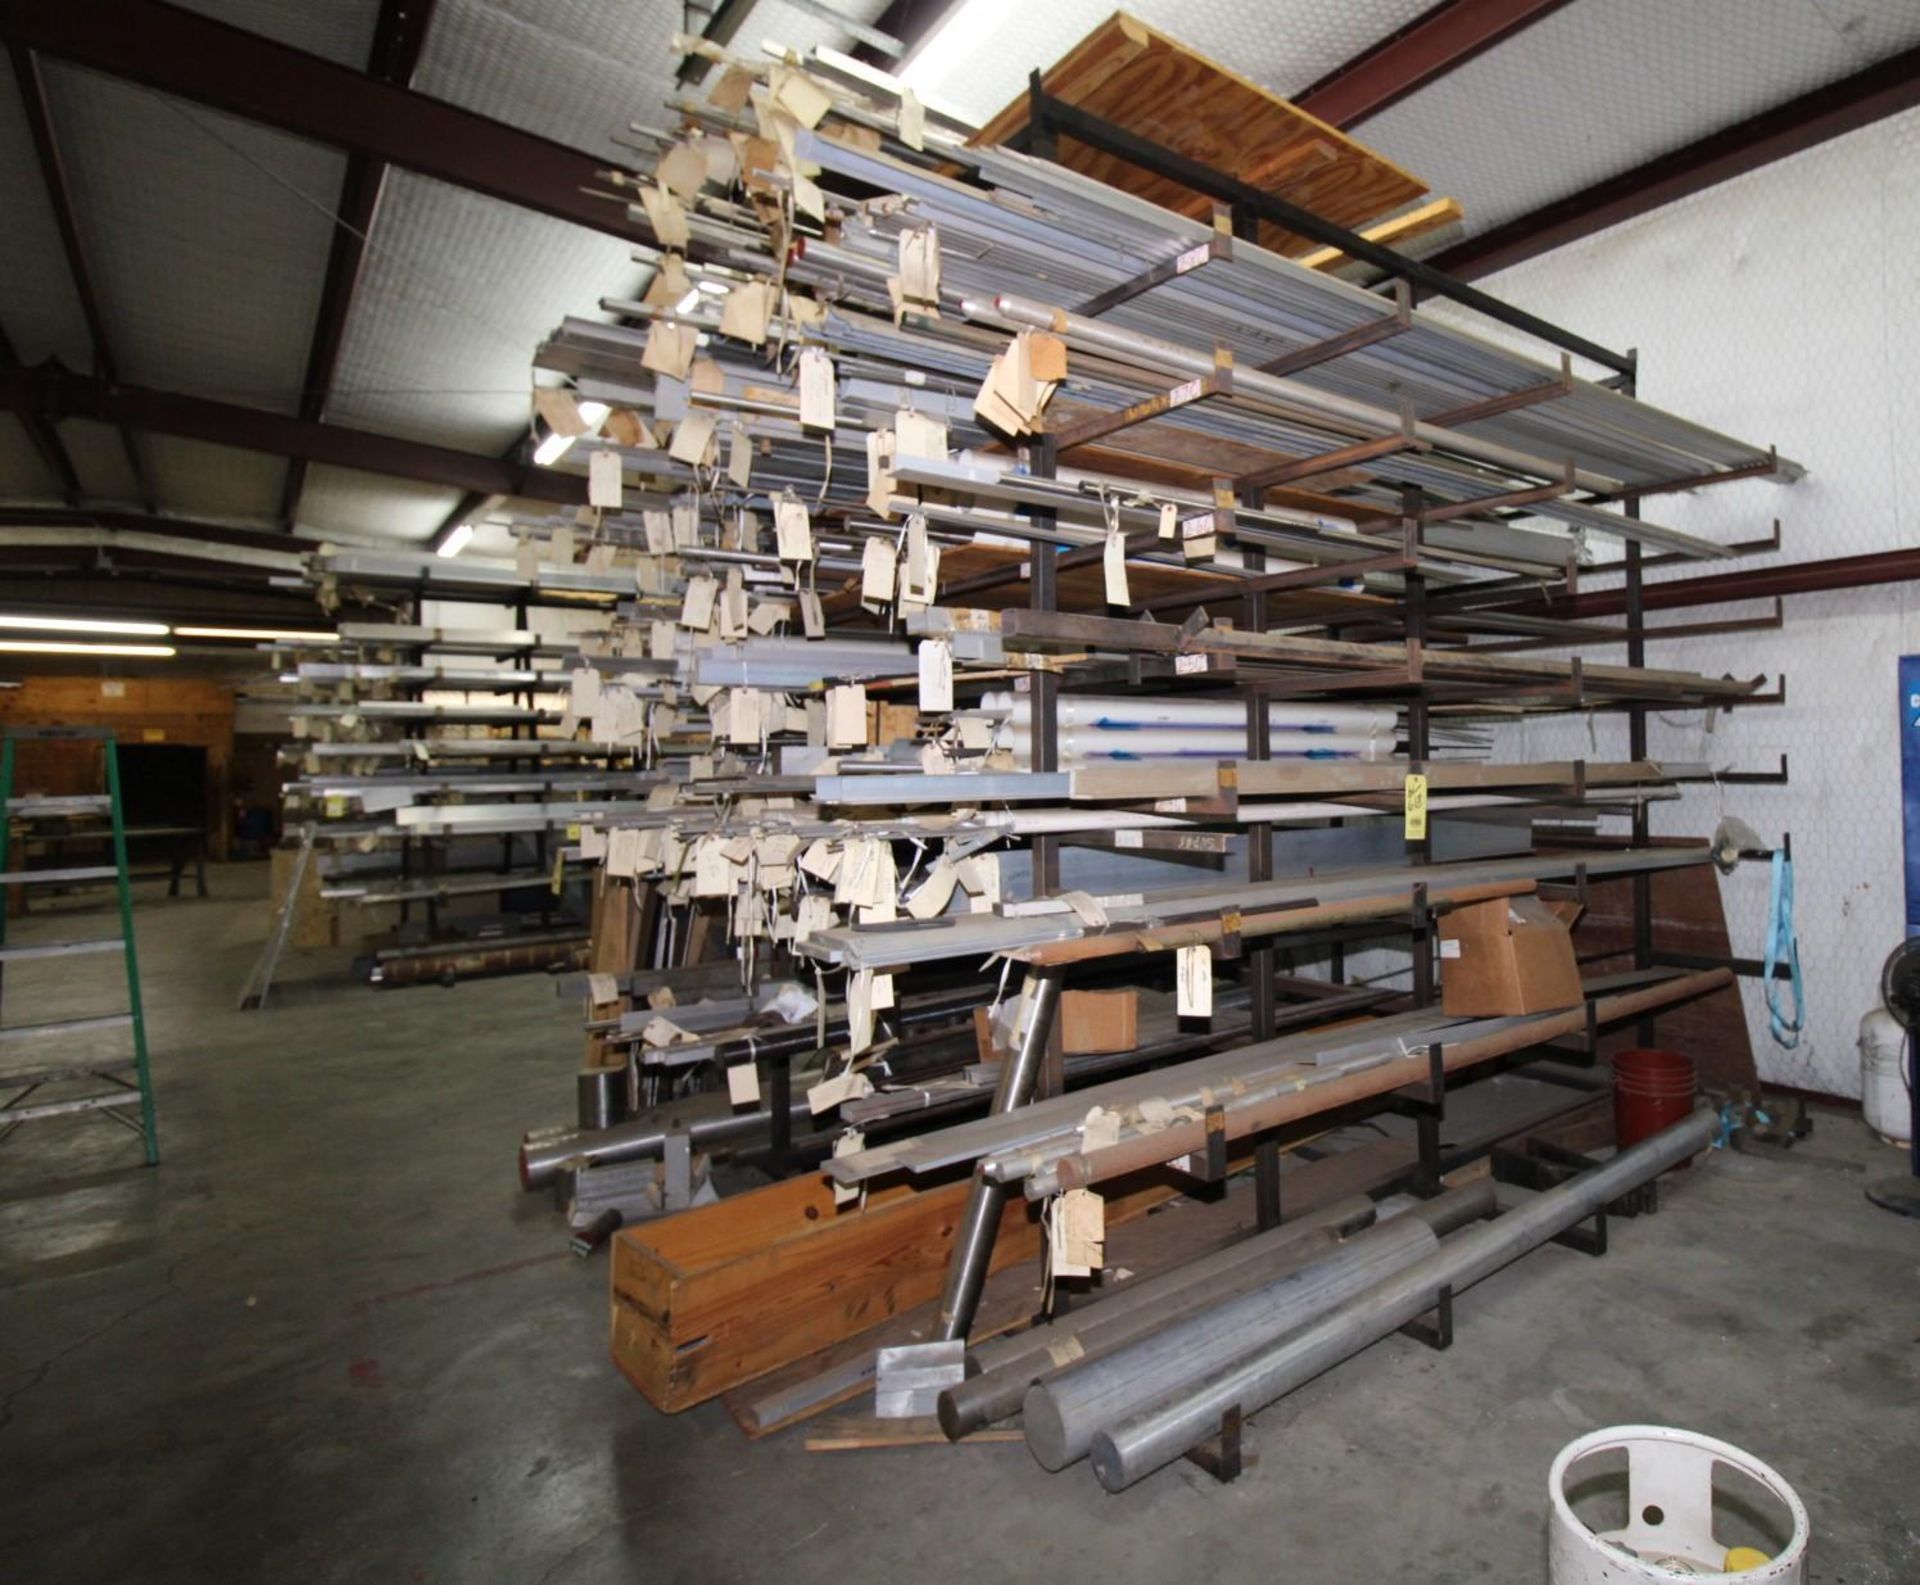 LOT OF ALUMINUM & 17-4 S.S. INVENTORY, W/ DOUBLE CANTILEVER STEEL RACK, 10'W BASE X 10' HT., Sample - Image 4 of 21